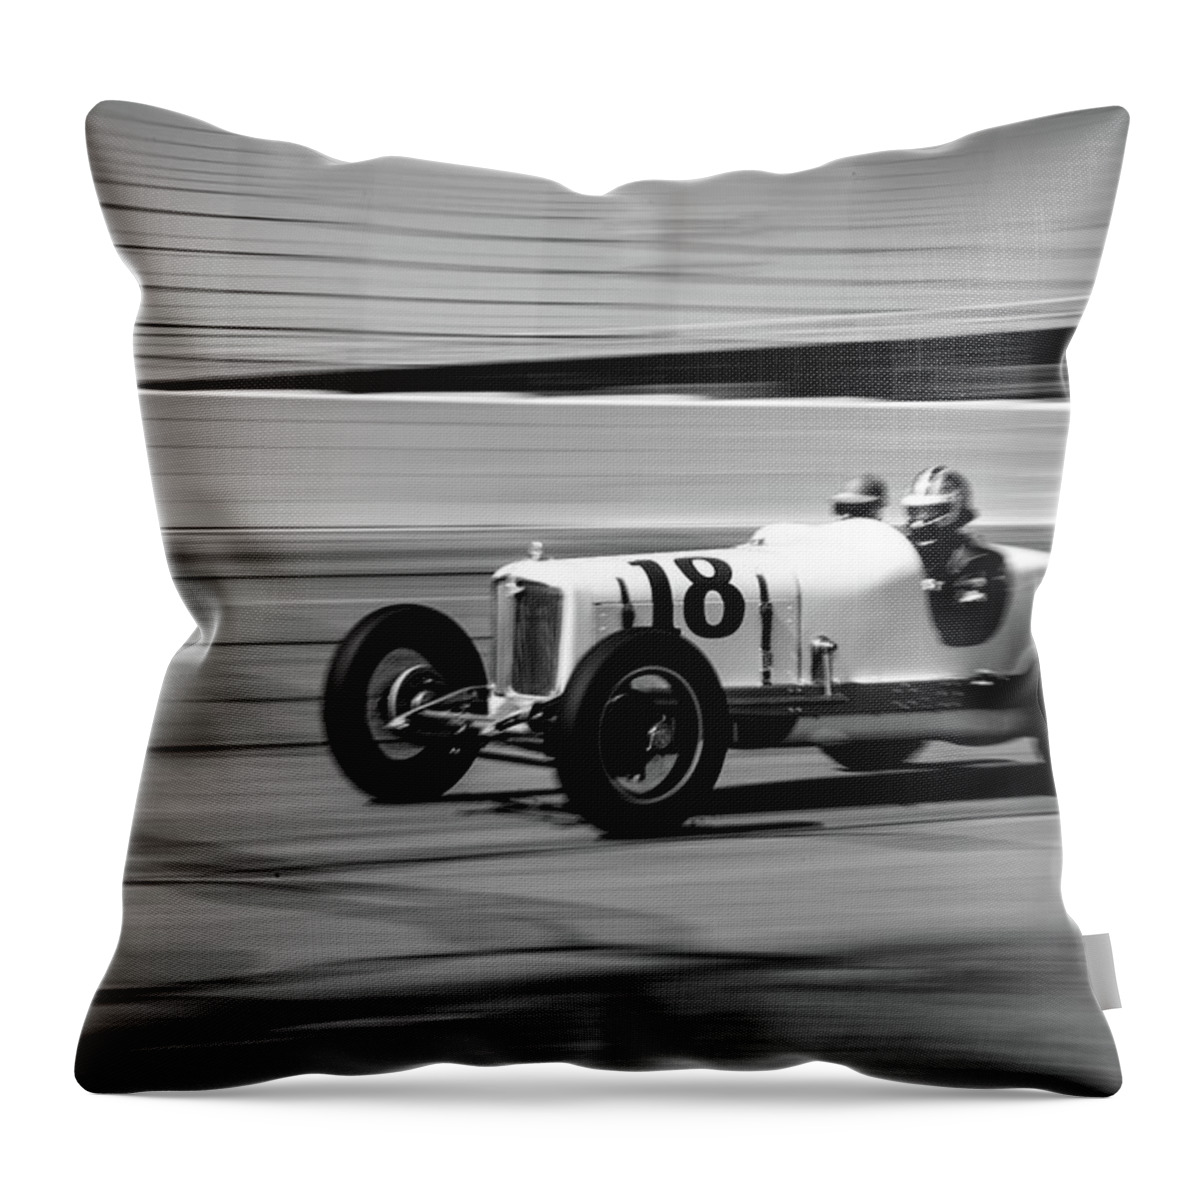  Throw Pillow featuring the photograph 1925 Miller by Josh Williams